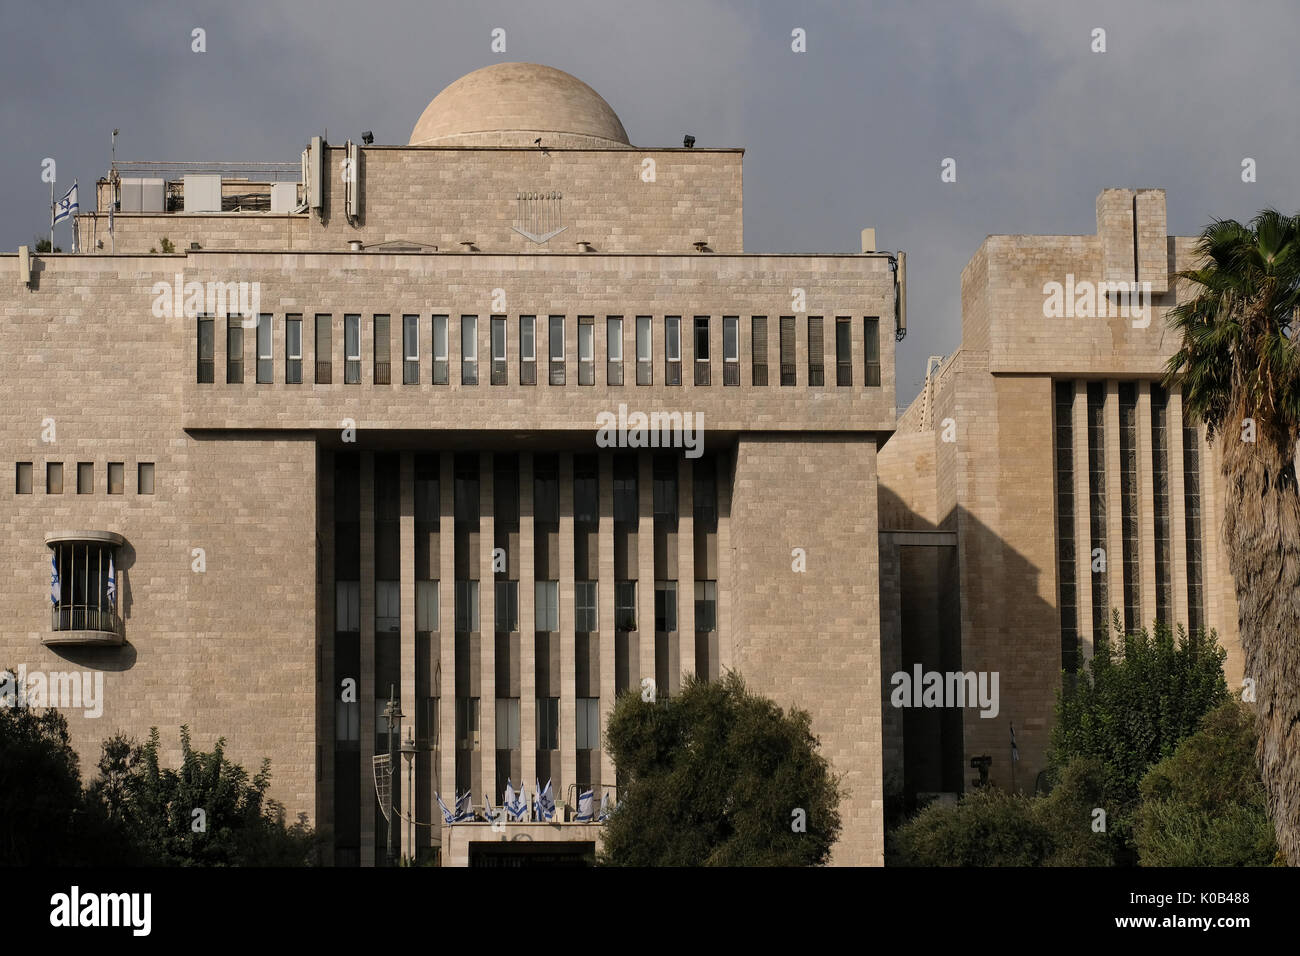 Exterior of Heichal Shlomo the former seat of the Chief Rabbinate of Israel and currently houses a museum of ritual Jewish art located adjacent to the Great Synagogue of Jerusalem on King George Street, West Jerusalem, Israel. Stock Photo